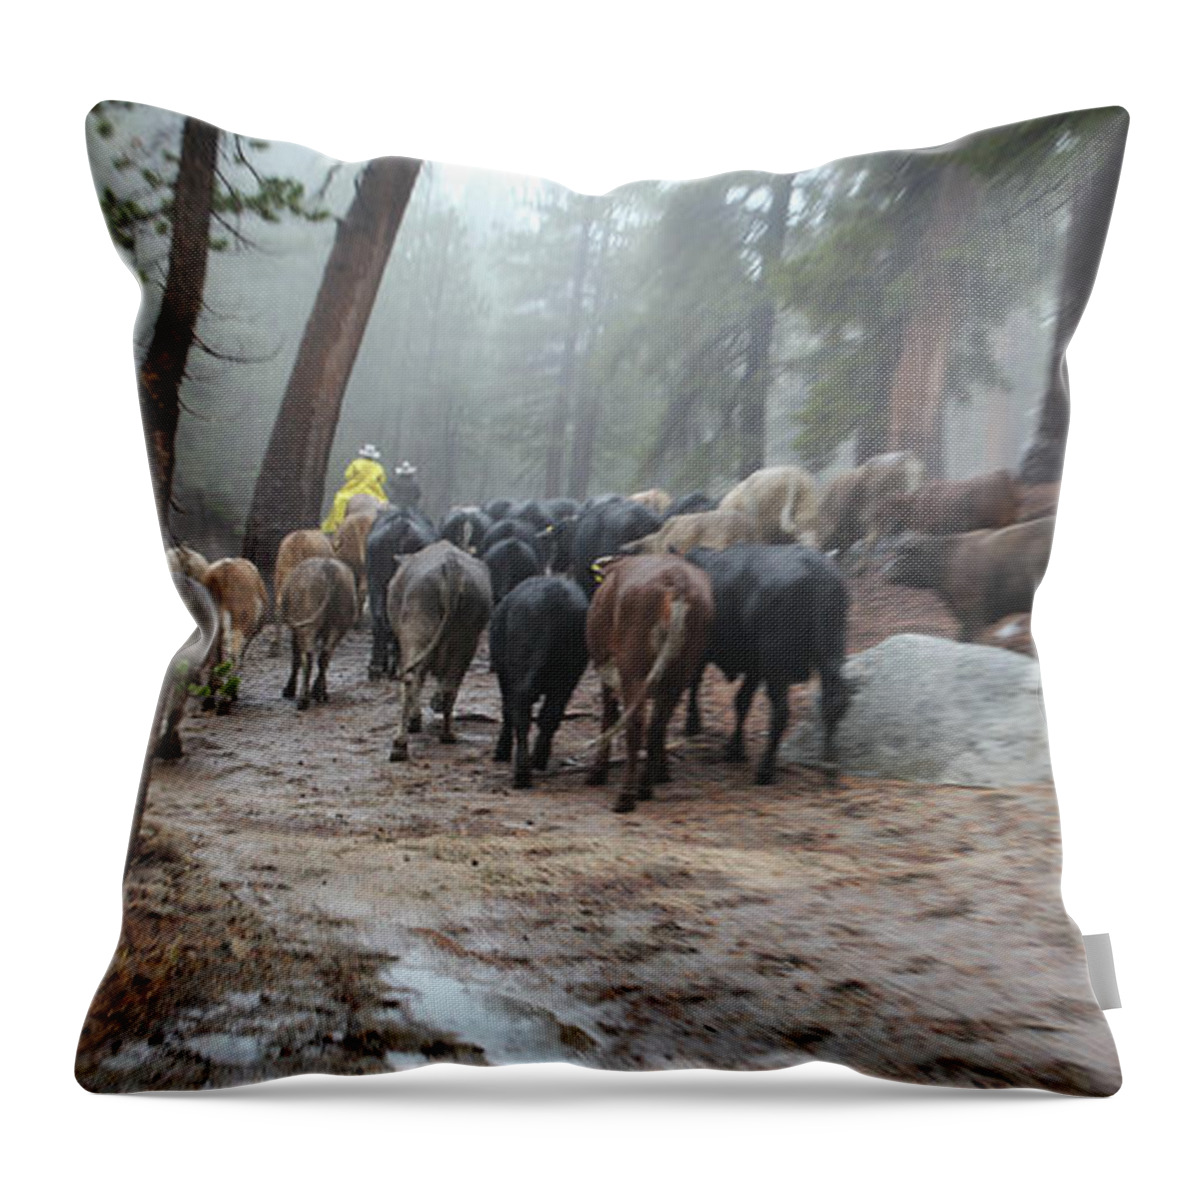 Cattle Throw Pillow featuring the photograph Cattle Moving by Diane Bohna